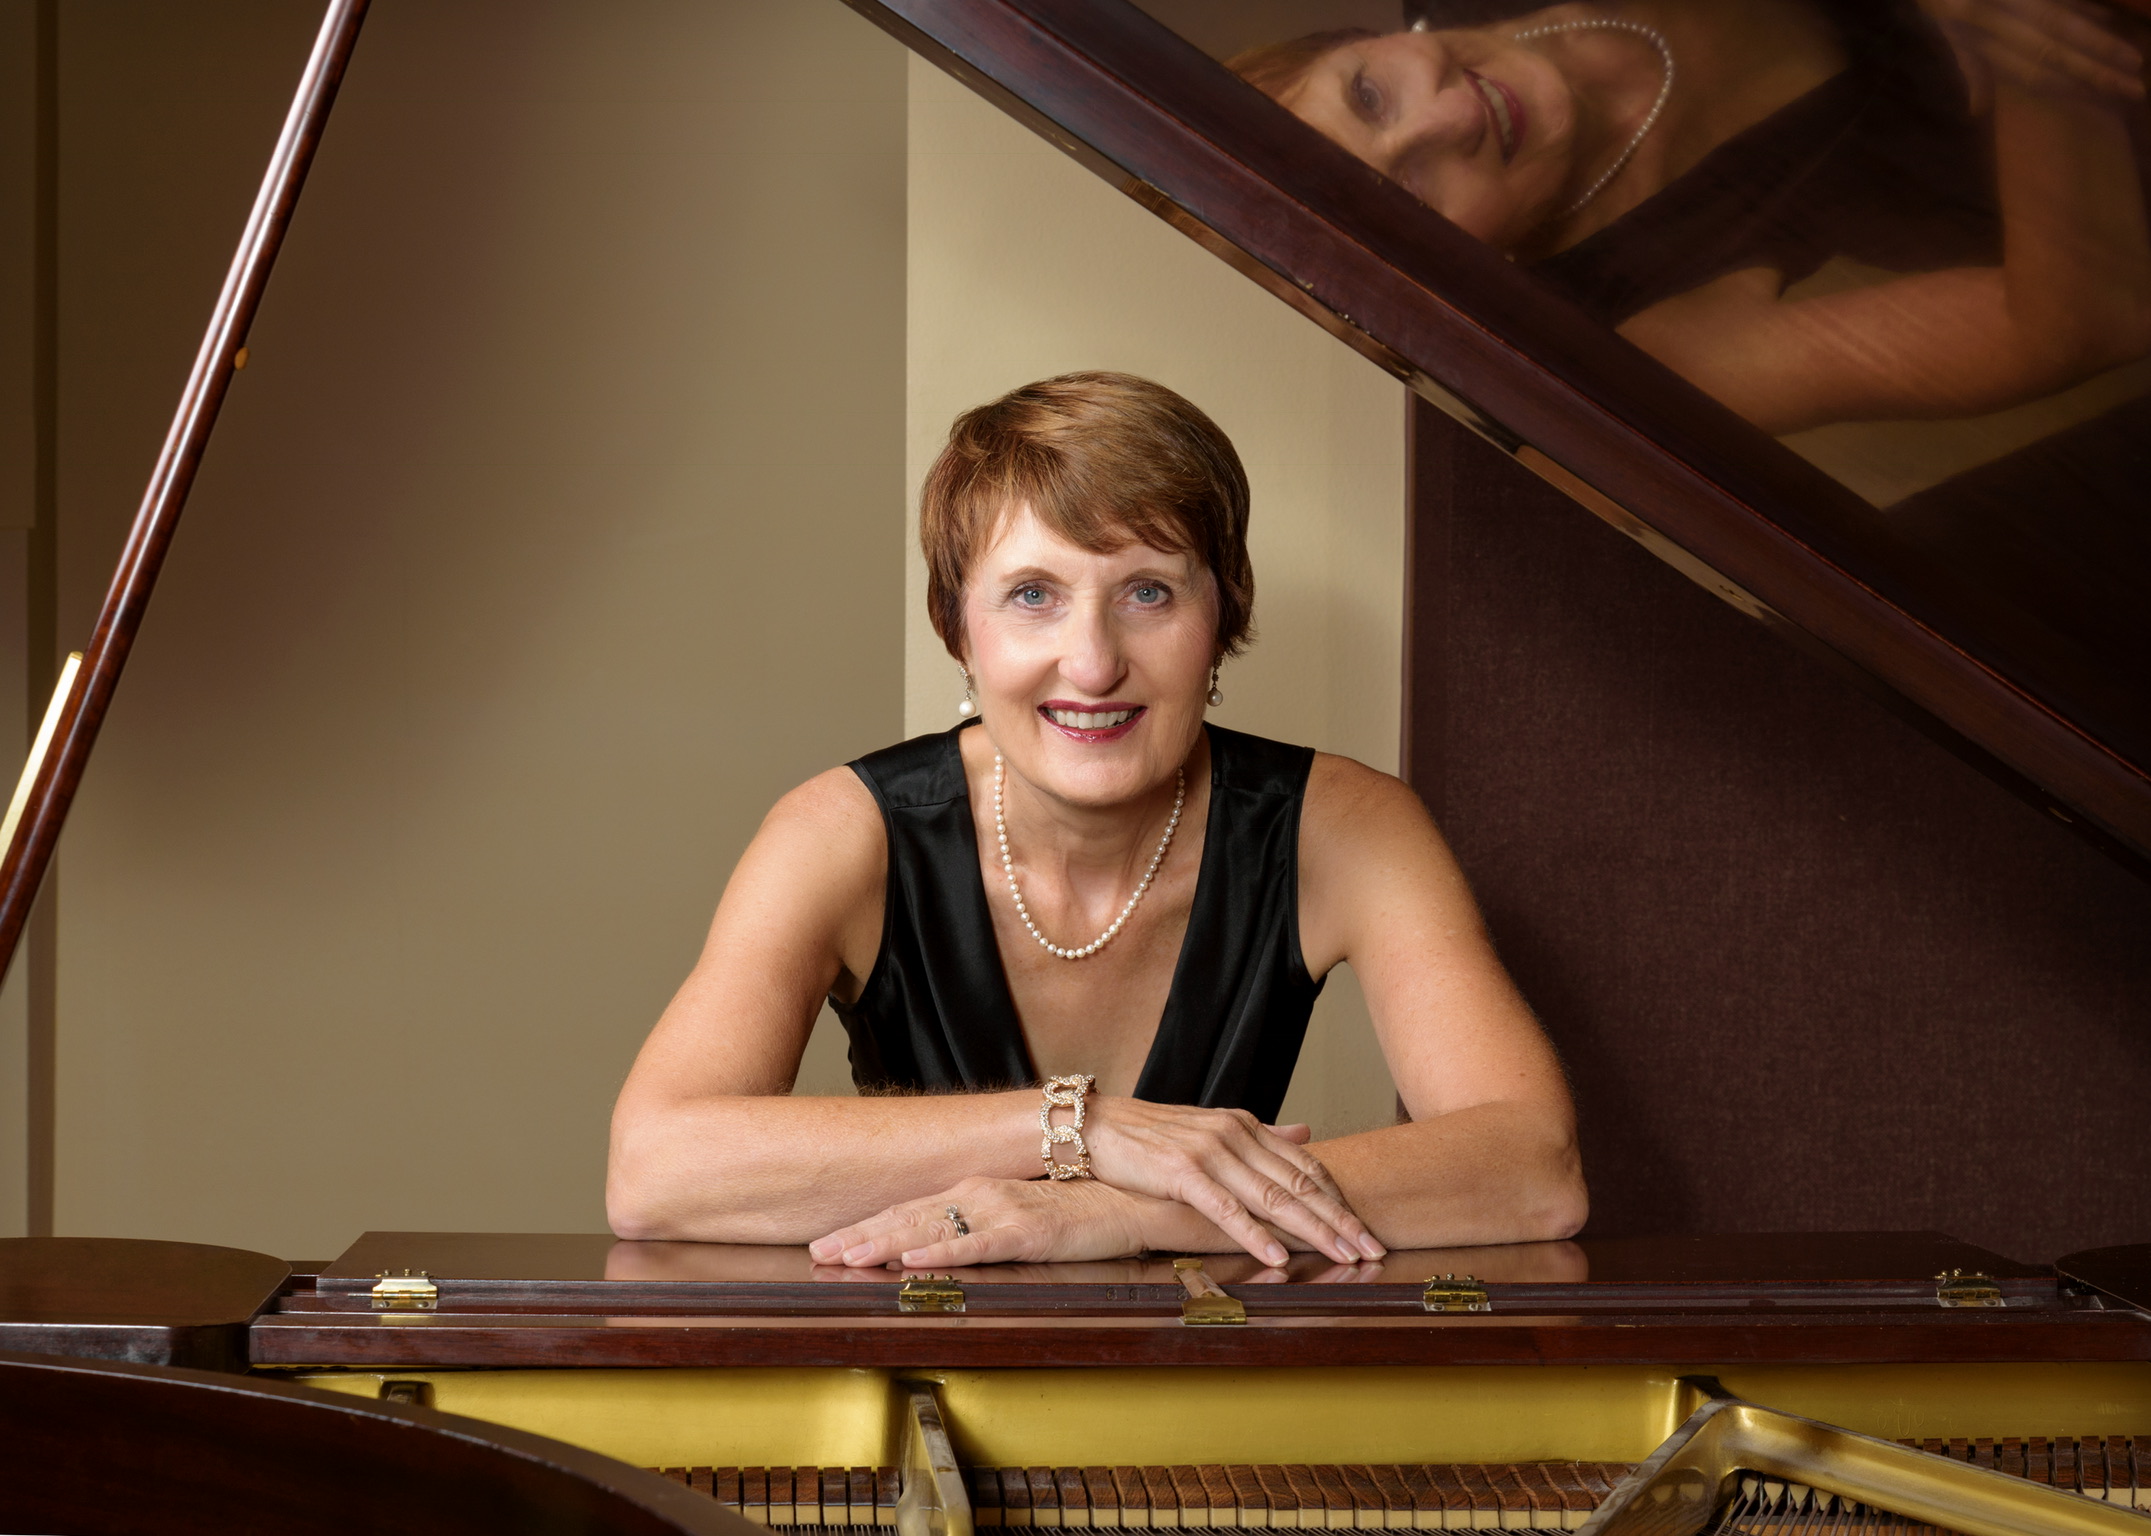 Providing Portland with Live Piano Music for Weddings, Events, and Retirement communities, Notes of Celebration is music that is played from the heartstrings